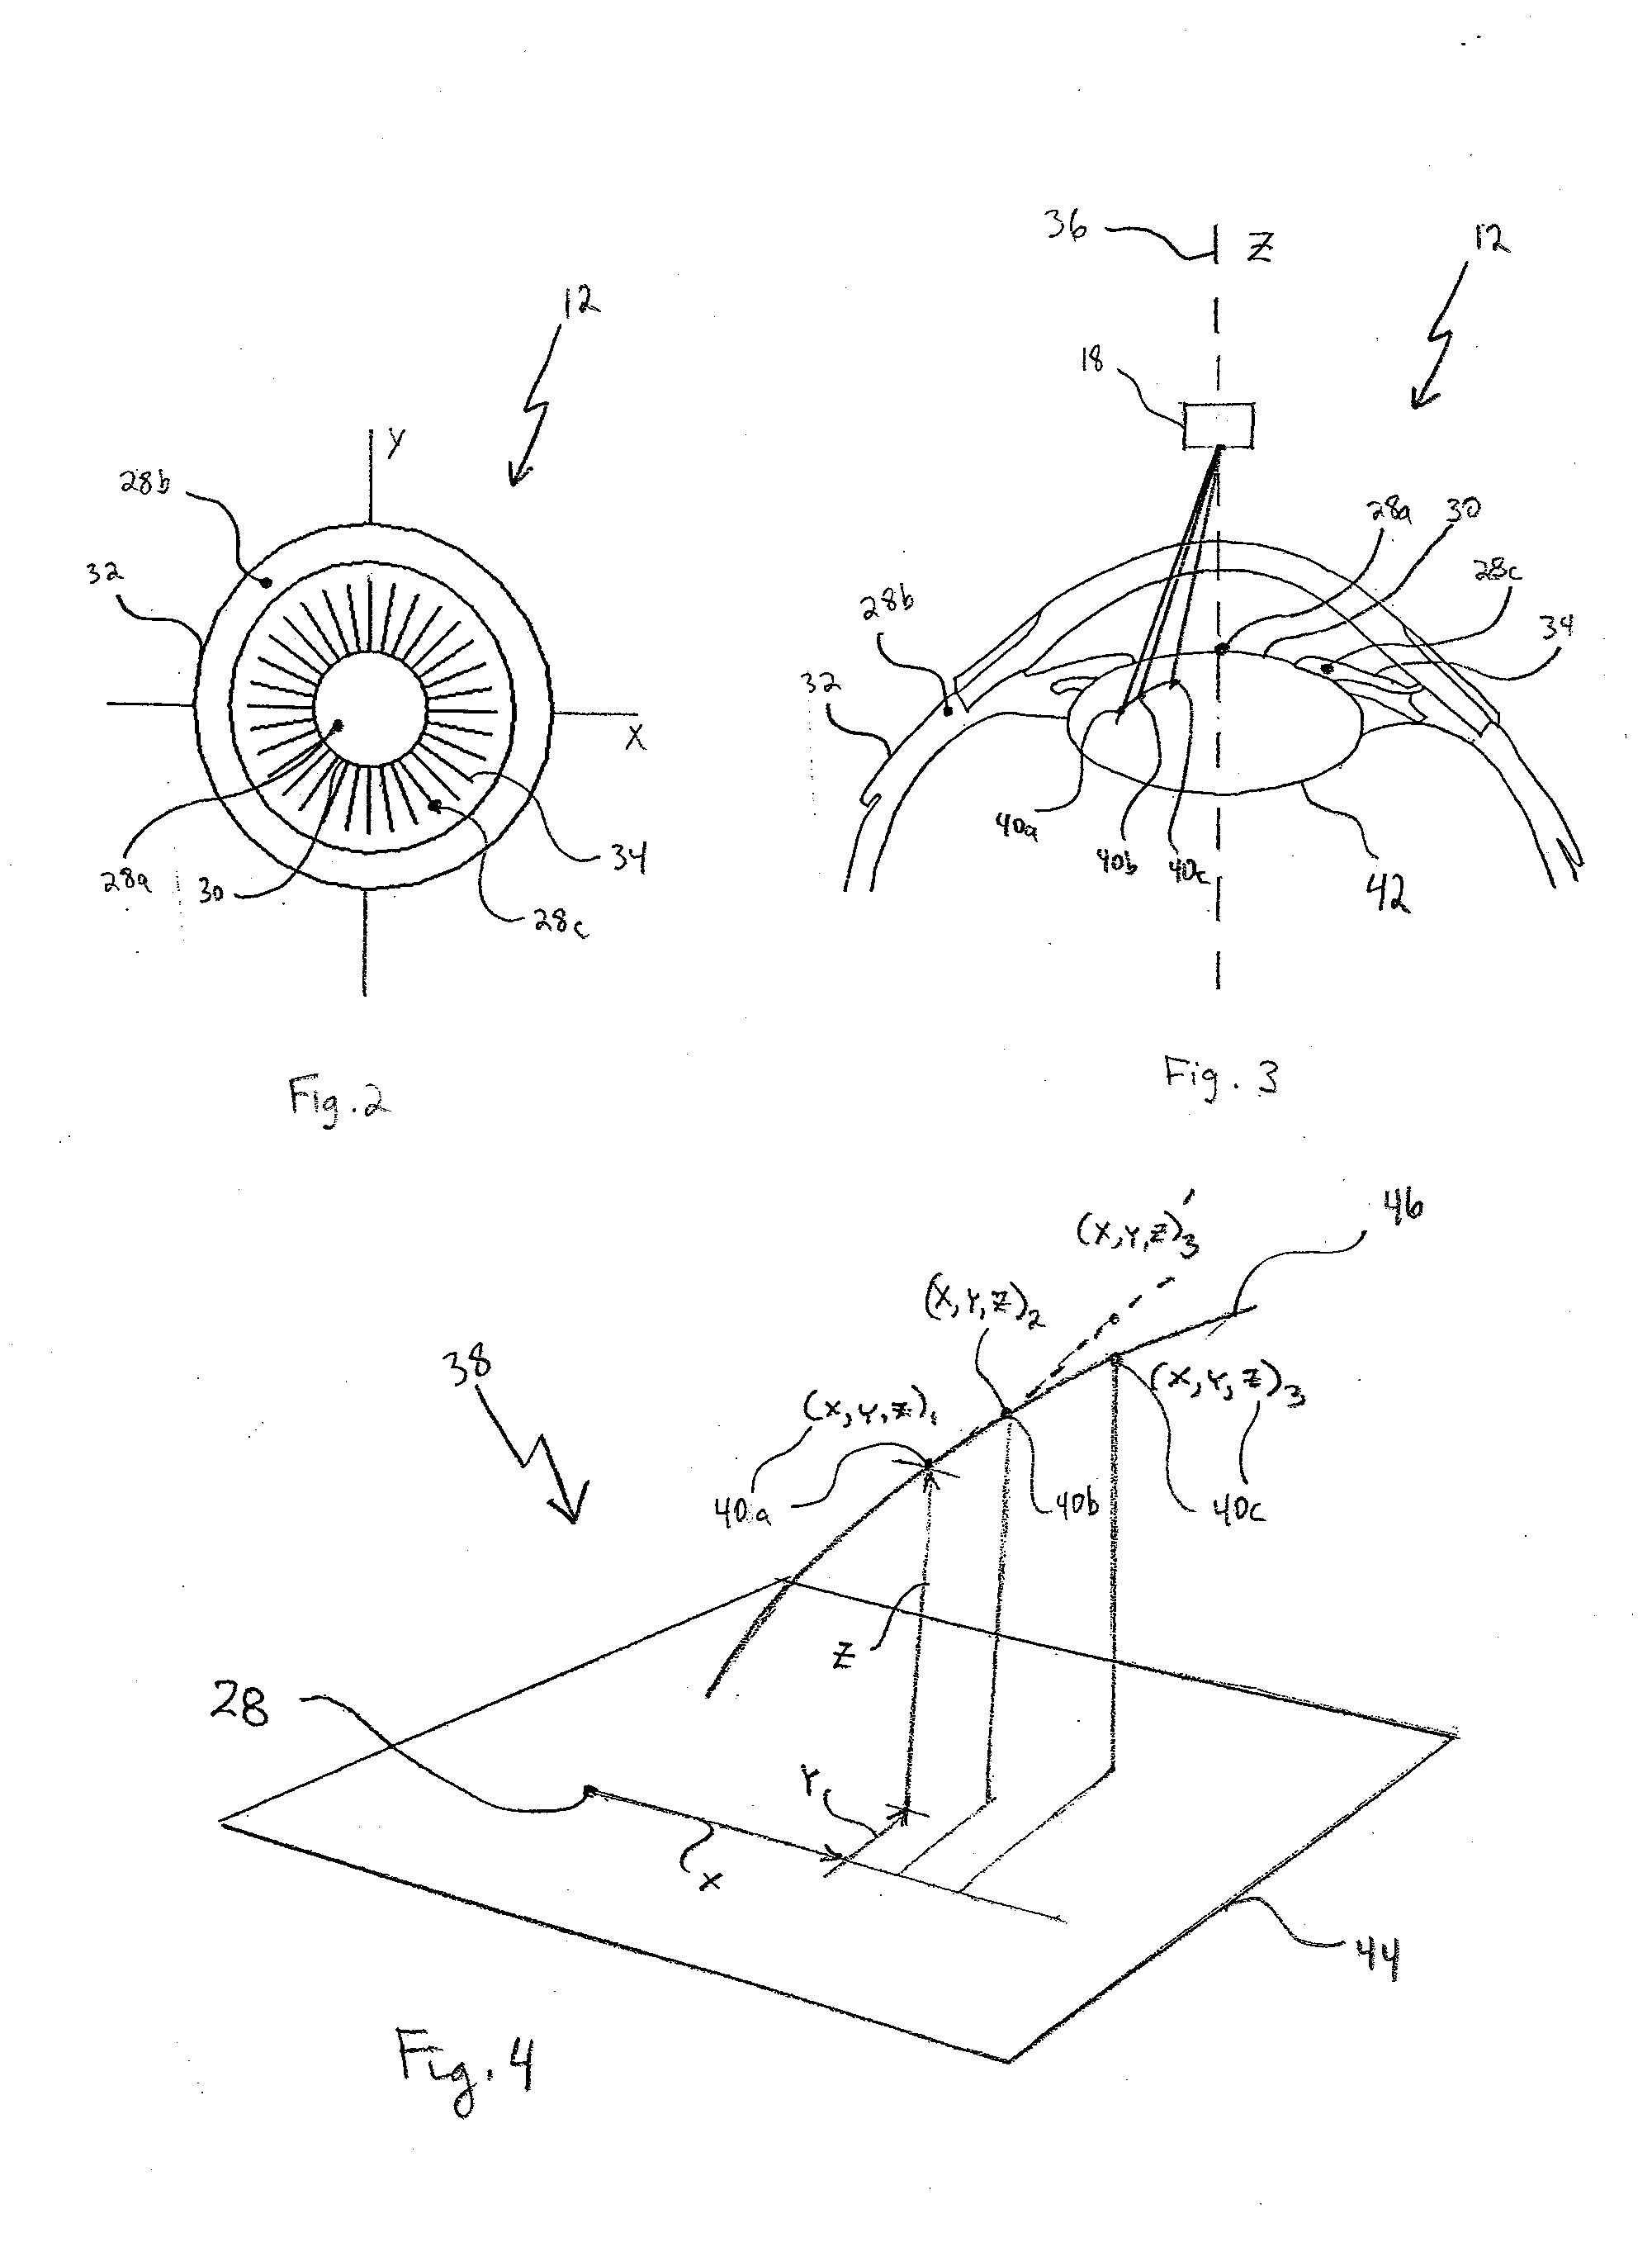 System and Method for Using Multiple Detectors